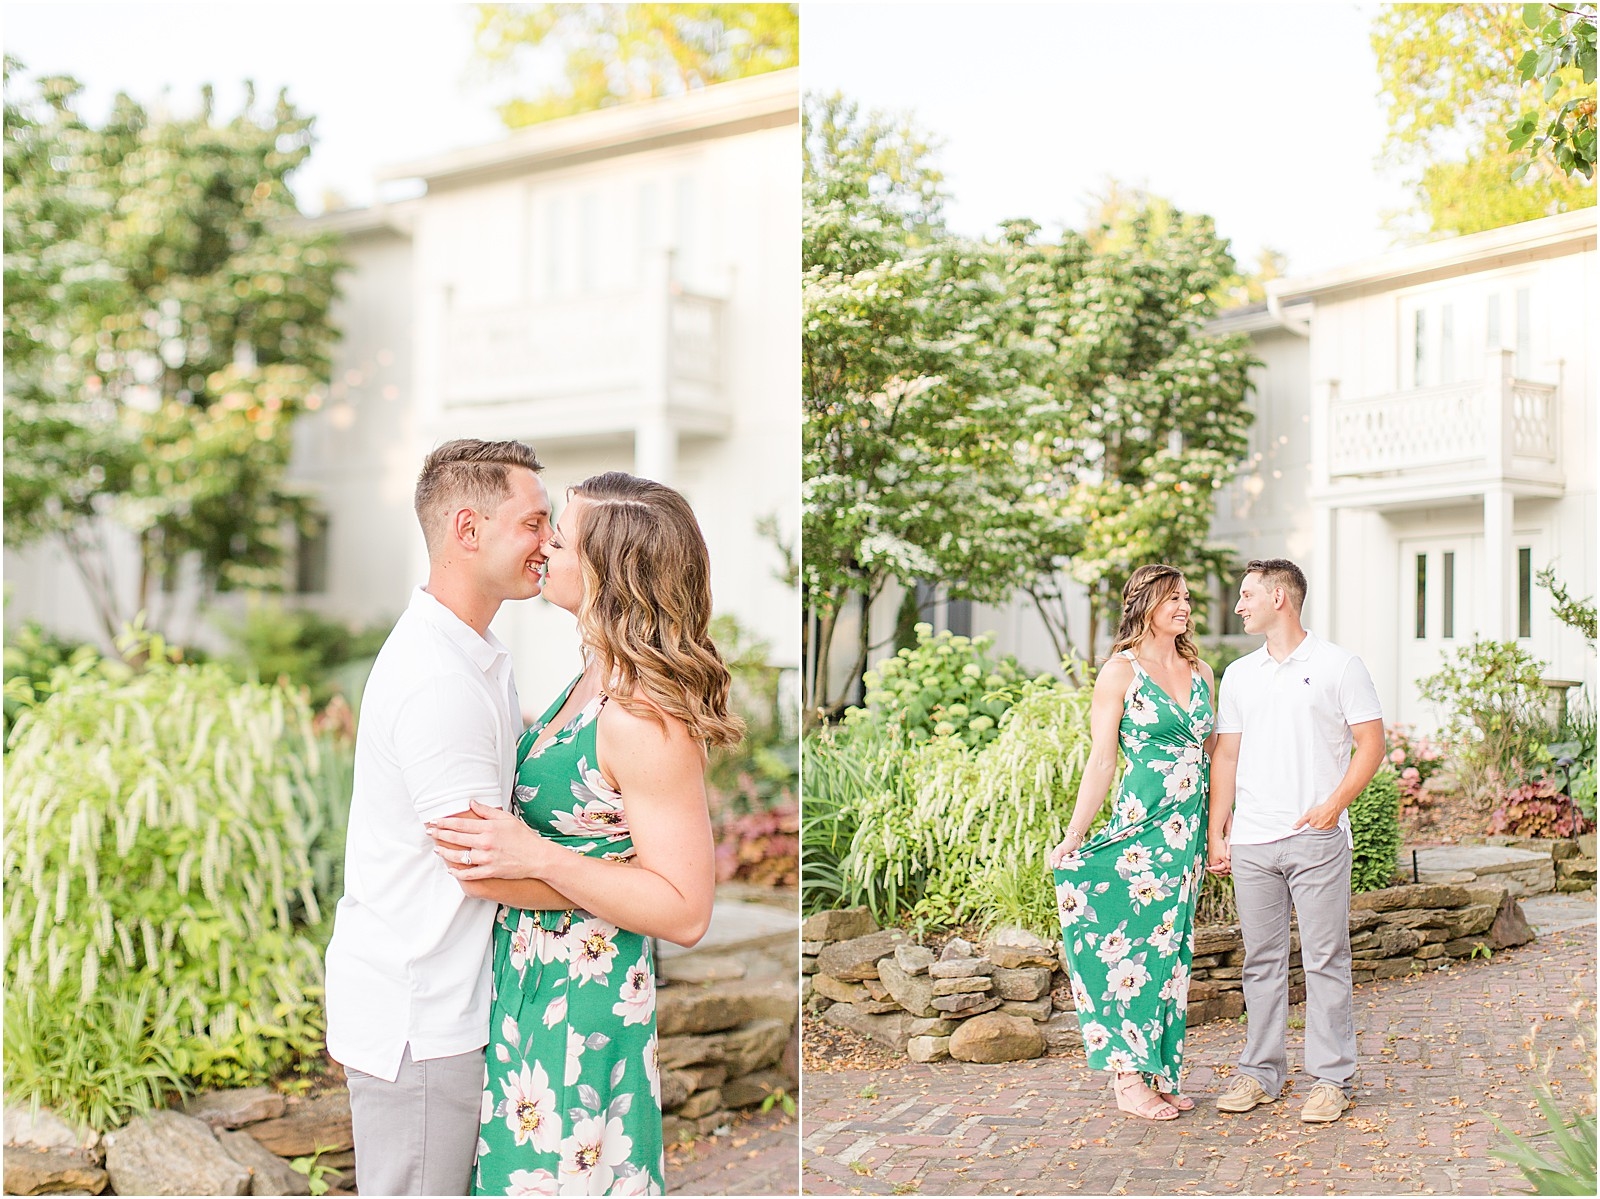 20 West Downtown Newburgh Anniversary Session | Katie and Bobby | Bret and Brandie Photography 013.jpg